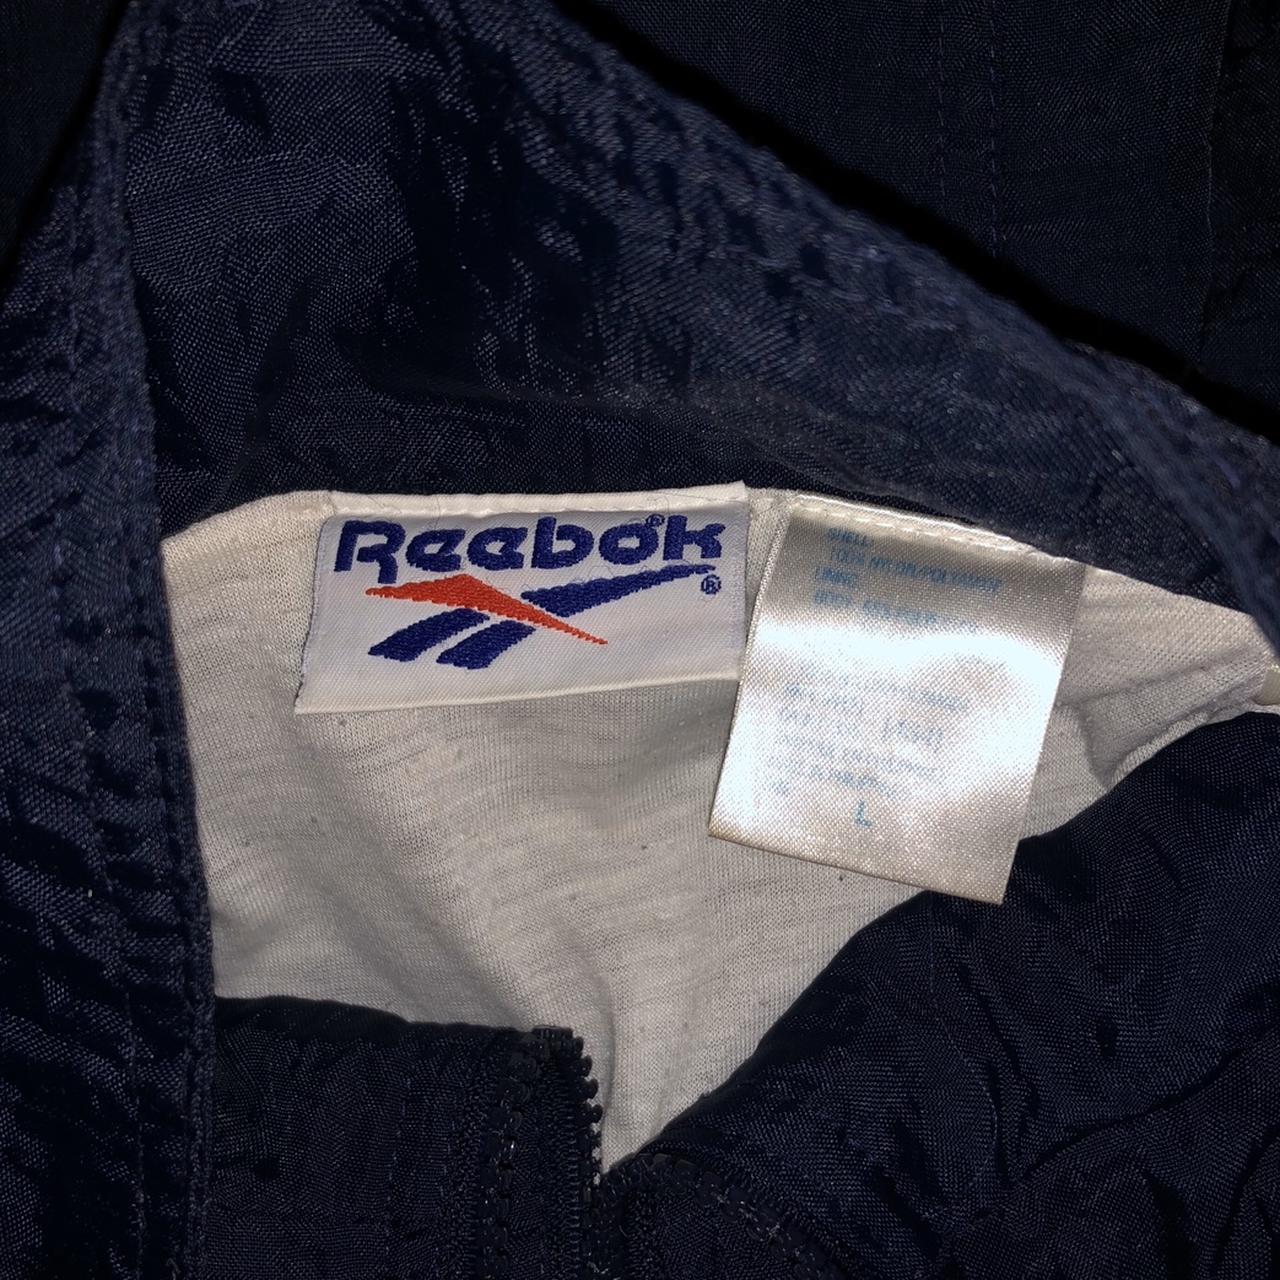 Product Image 4 - Vintage Reebok Windbreaker

Size: Large
Condition: Worn
Color: